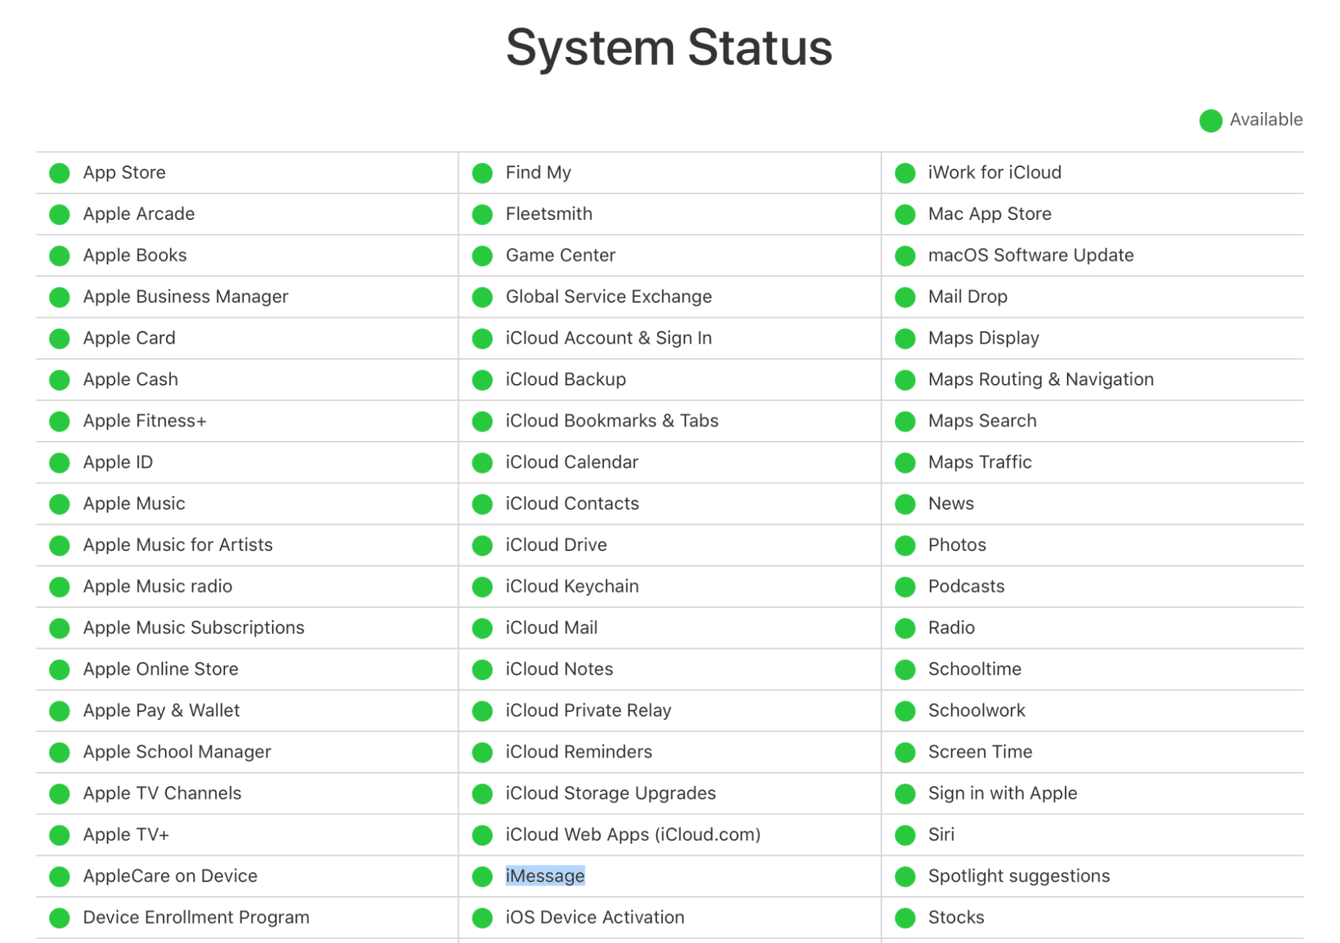 How to check Apple system status